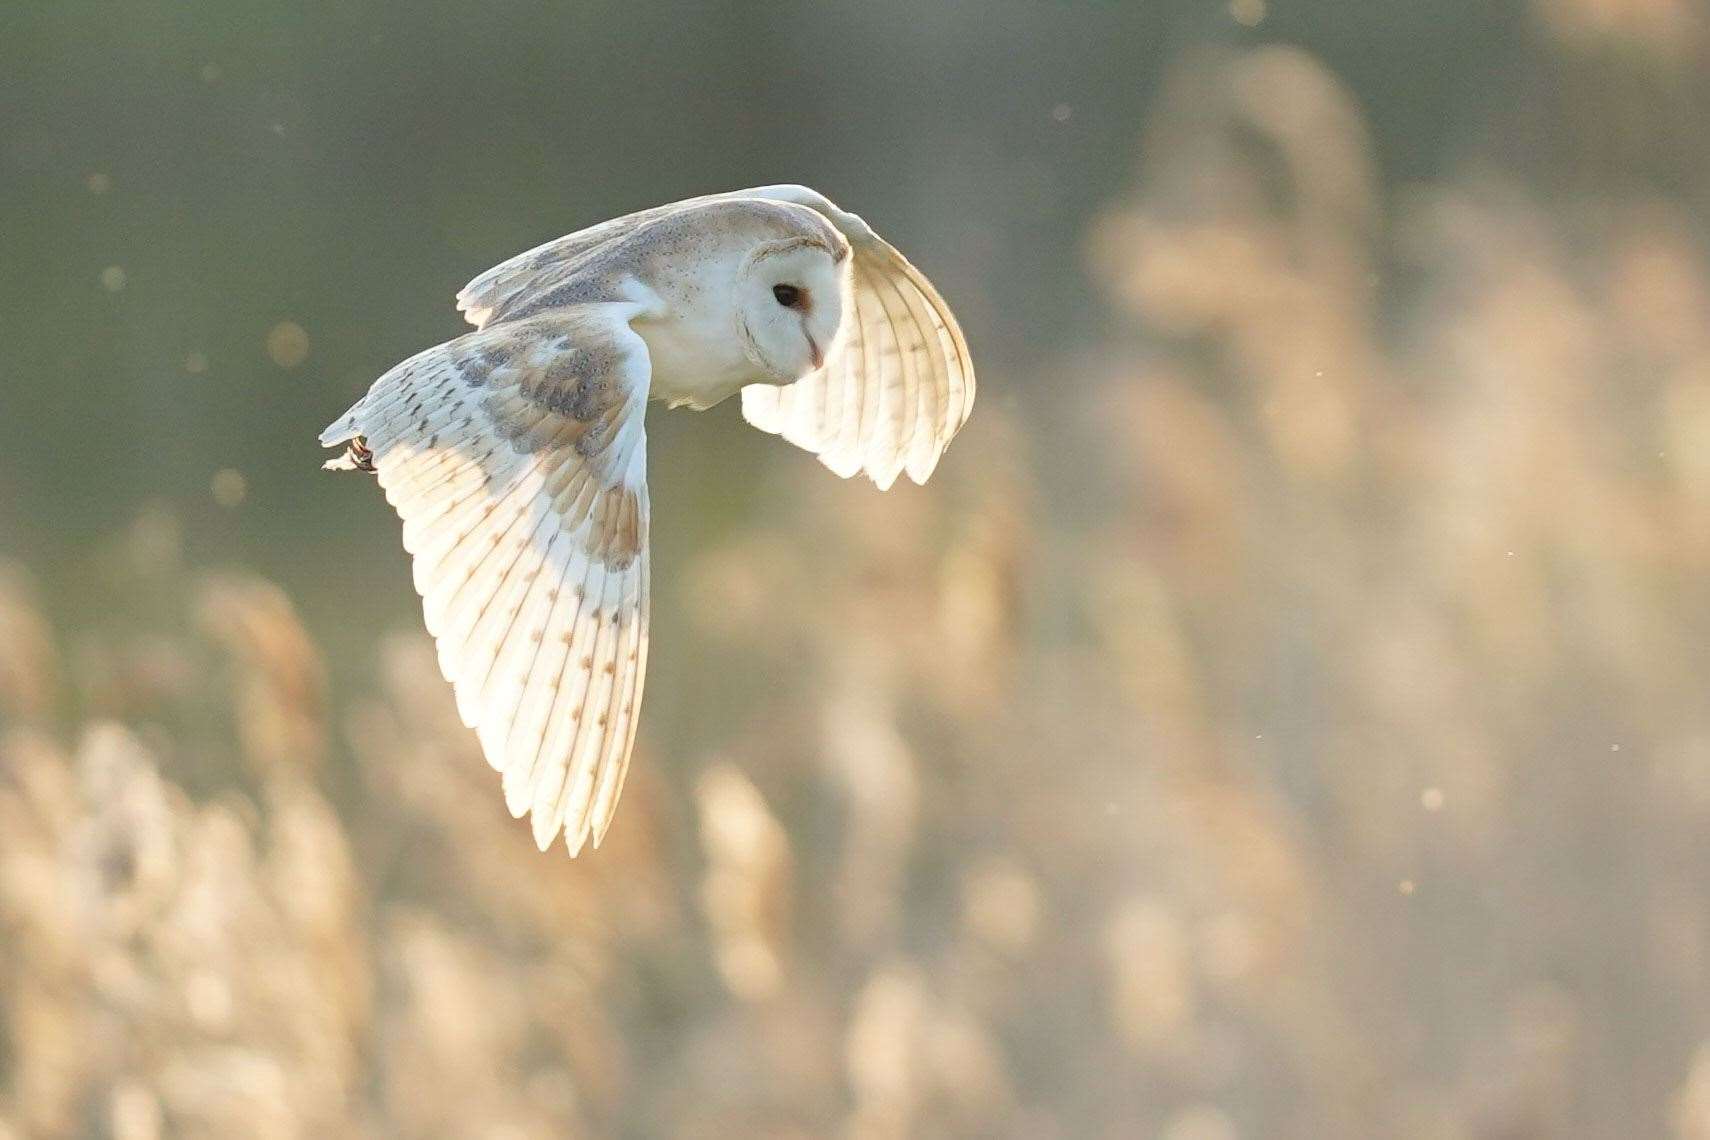 barn owl are listed under Schedule 1 of the Wildlife and Countryside Act 1981, giving them legal protection (James Manning/PA)